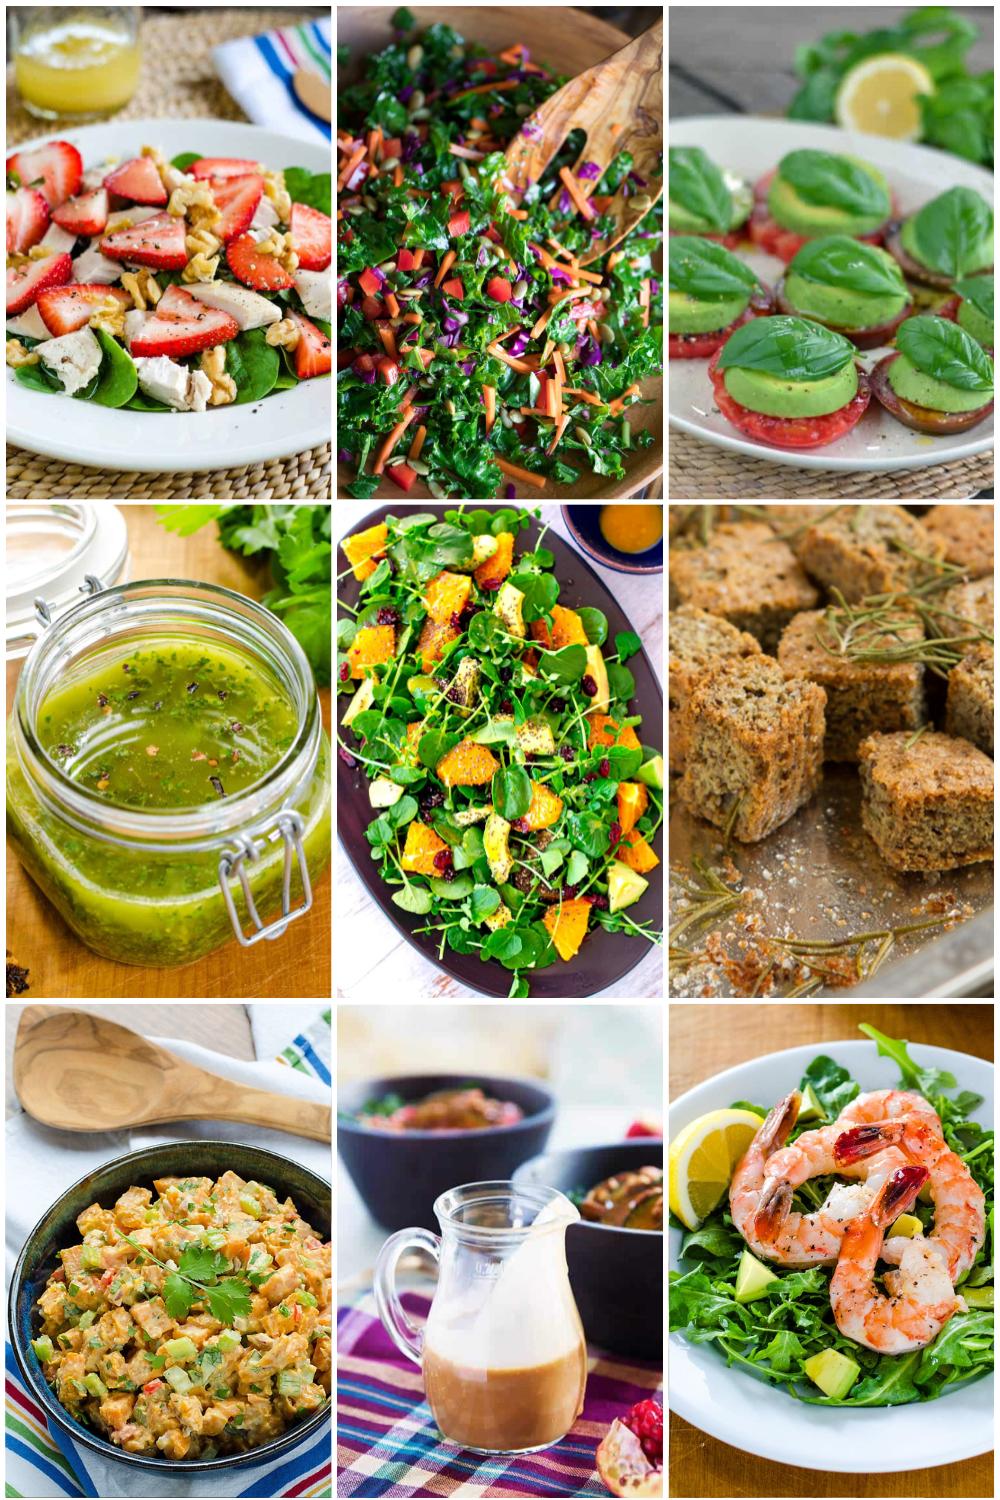 Healthy salad toppings ideas